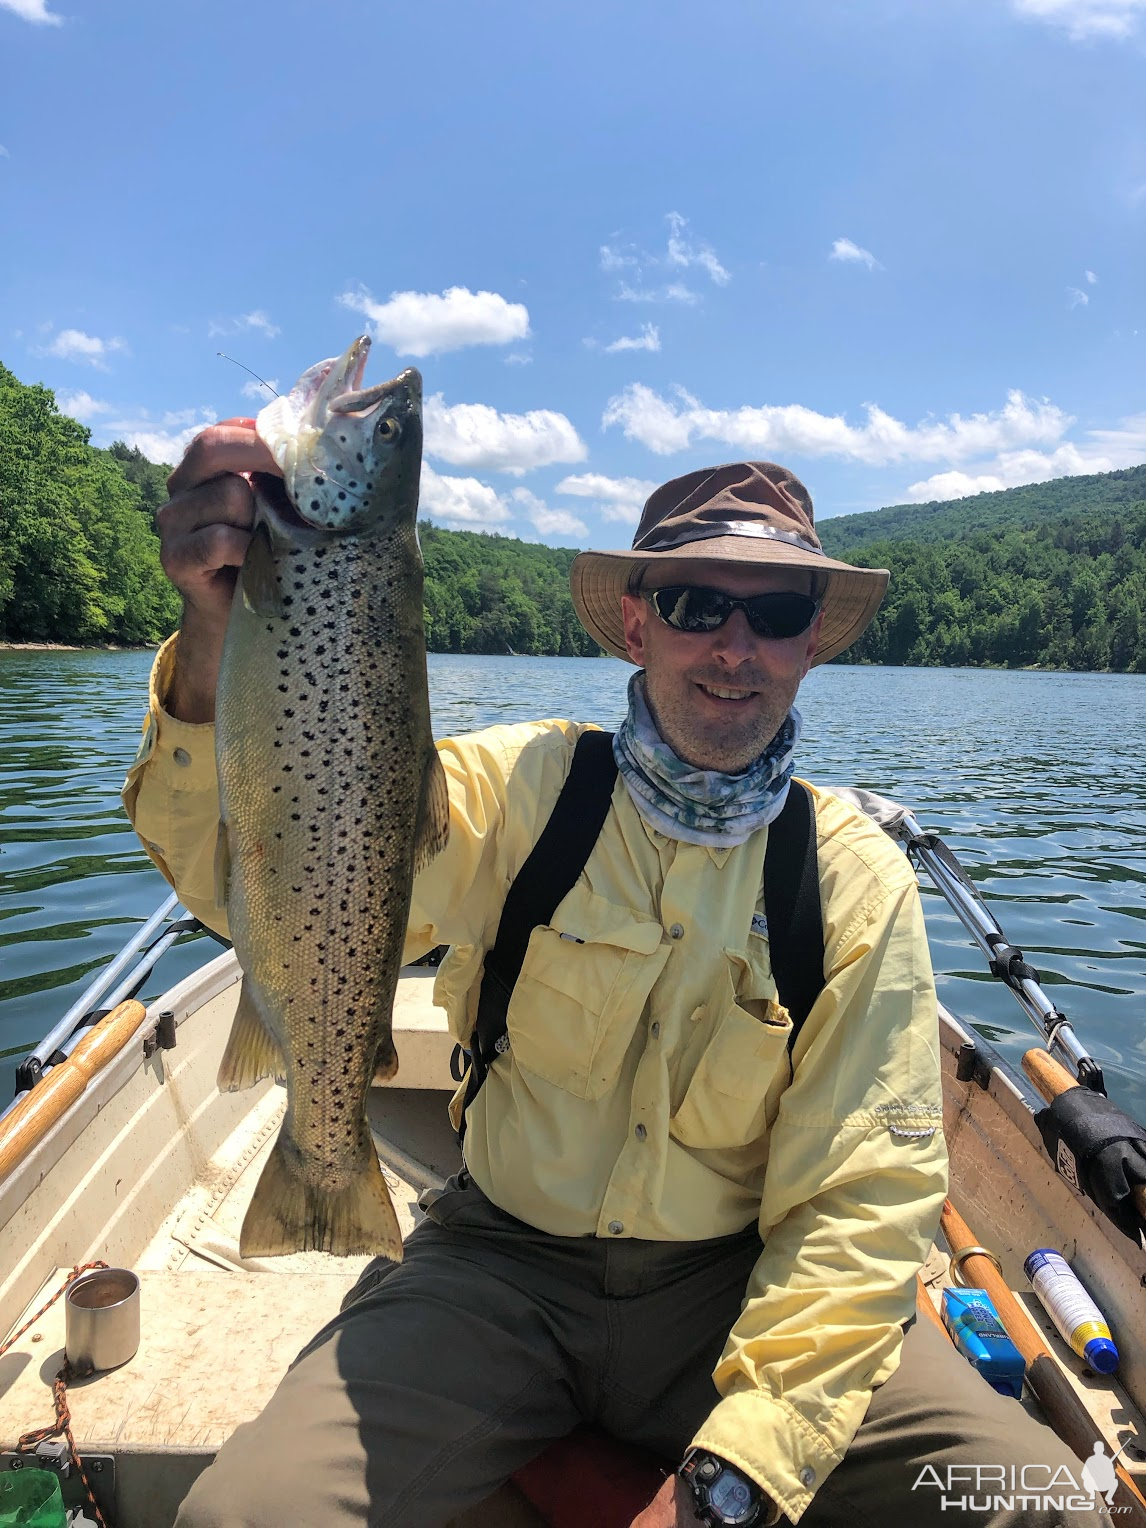 Trout Fishing Upstate New York